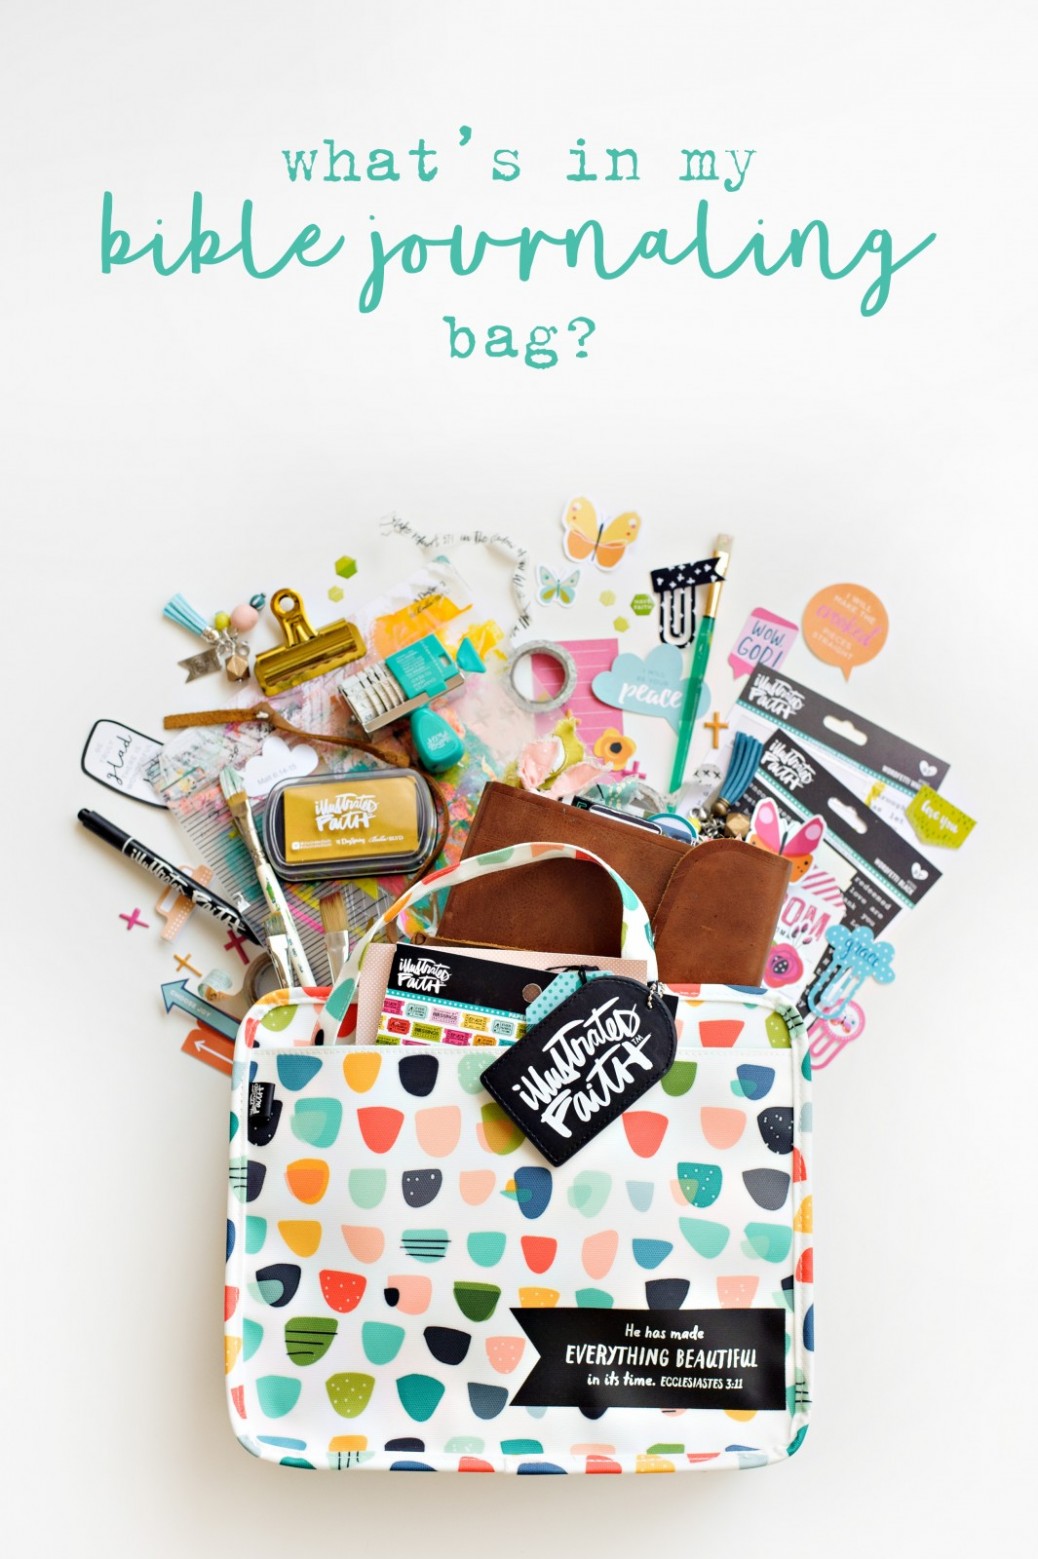 List of what's in Shanna Noel's Illustrated Faith Bible Journaling Bag